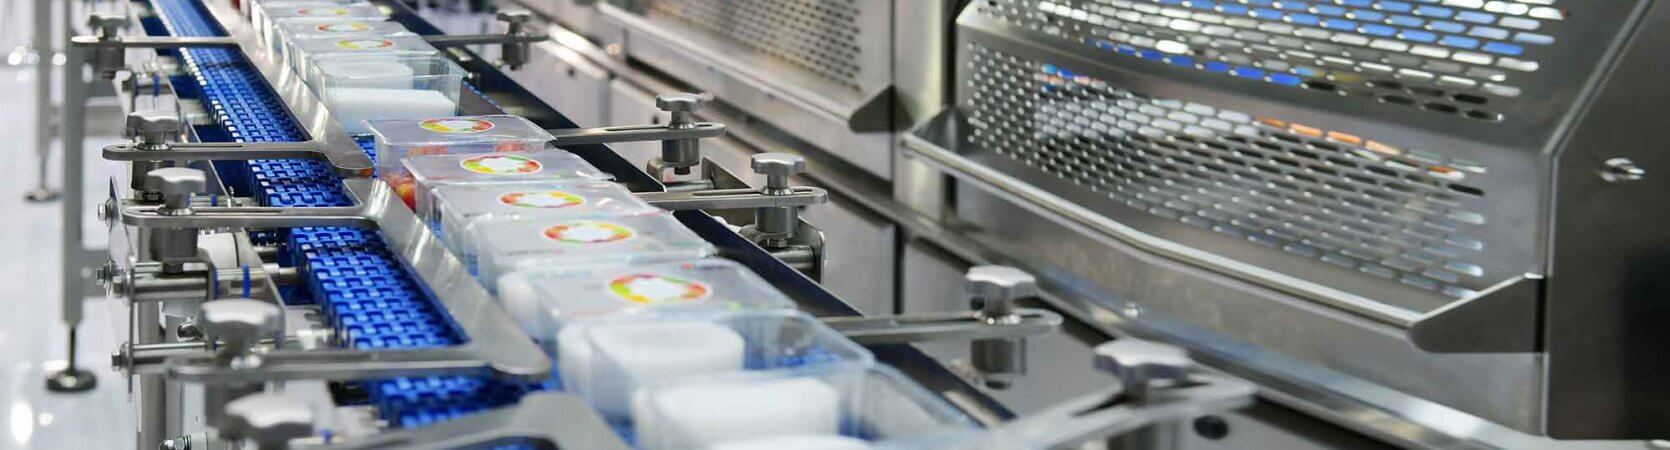 Food Processing Safety Traning Resources